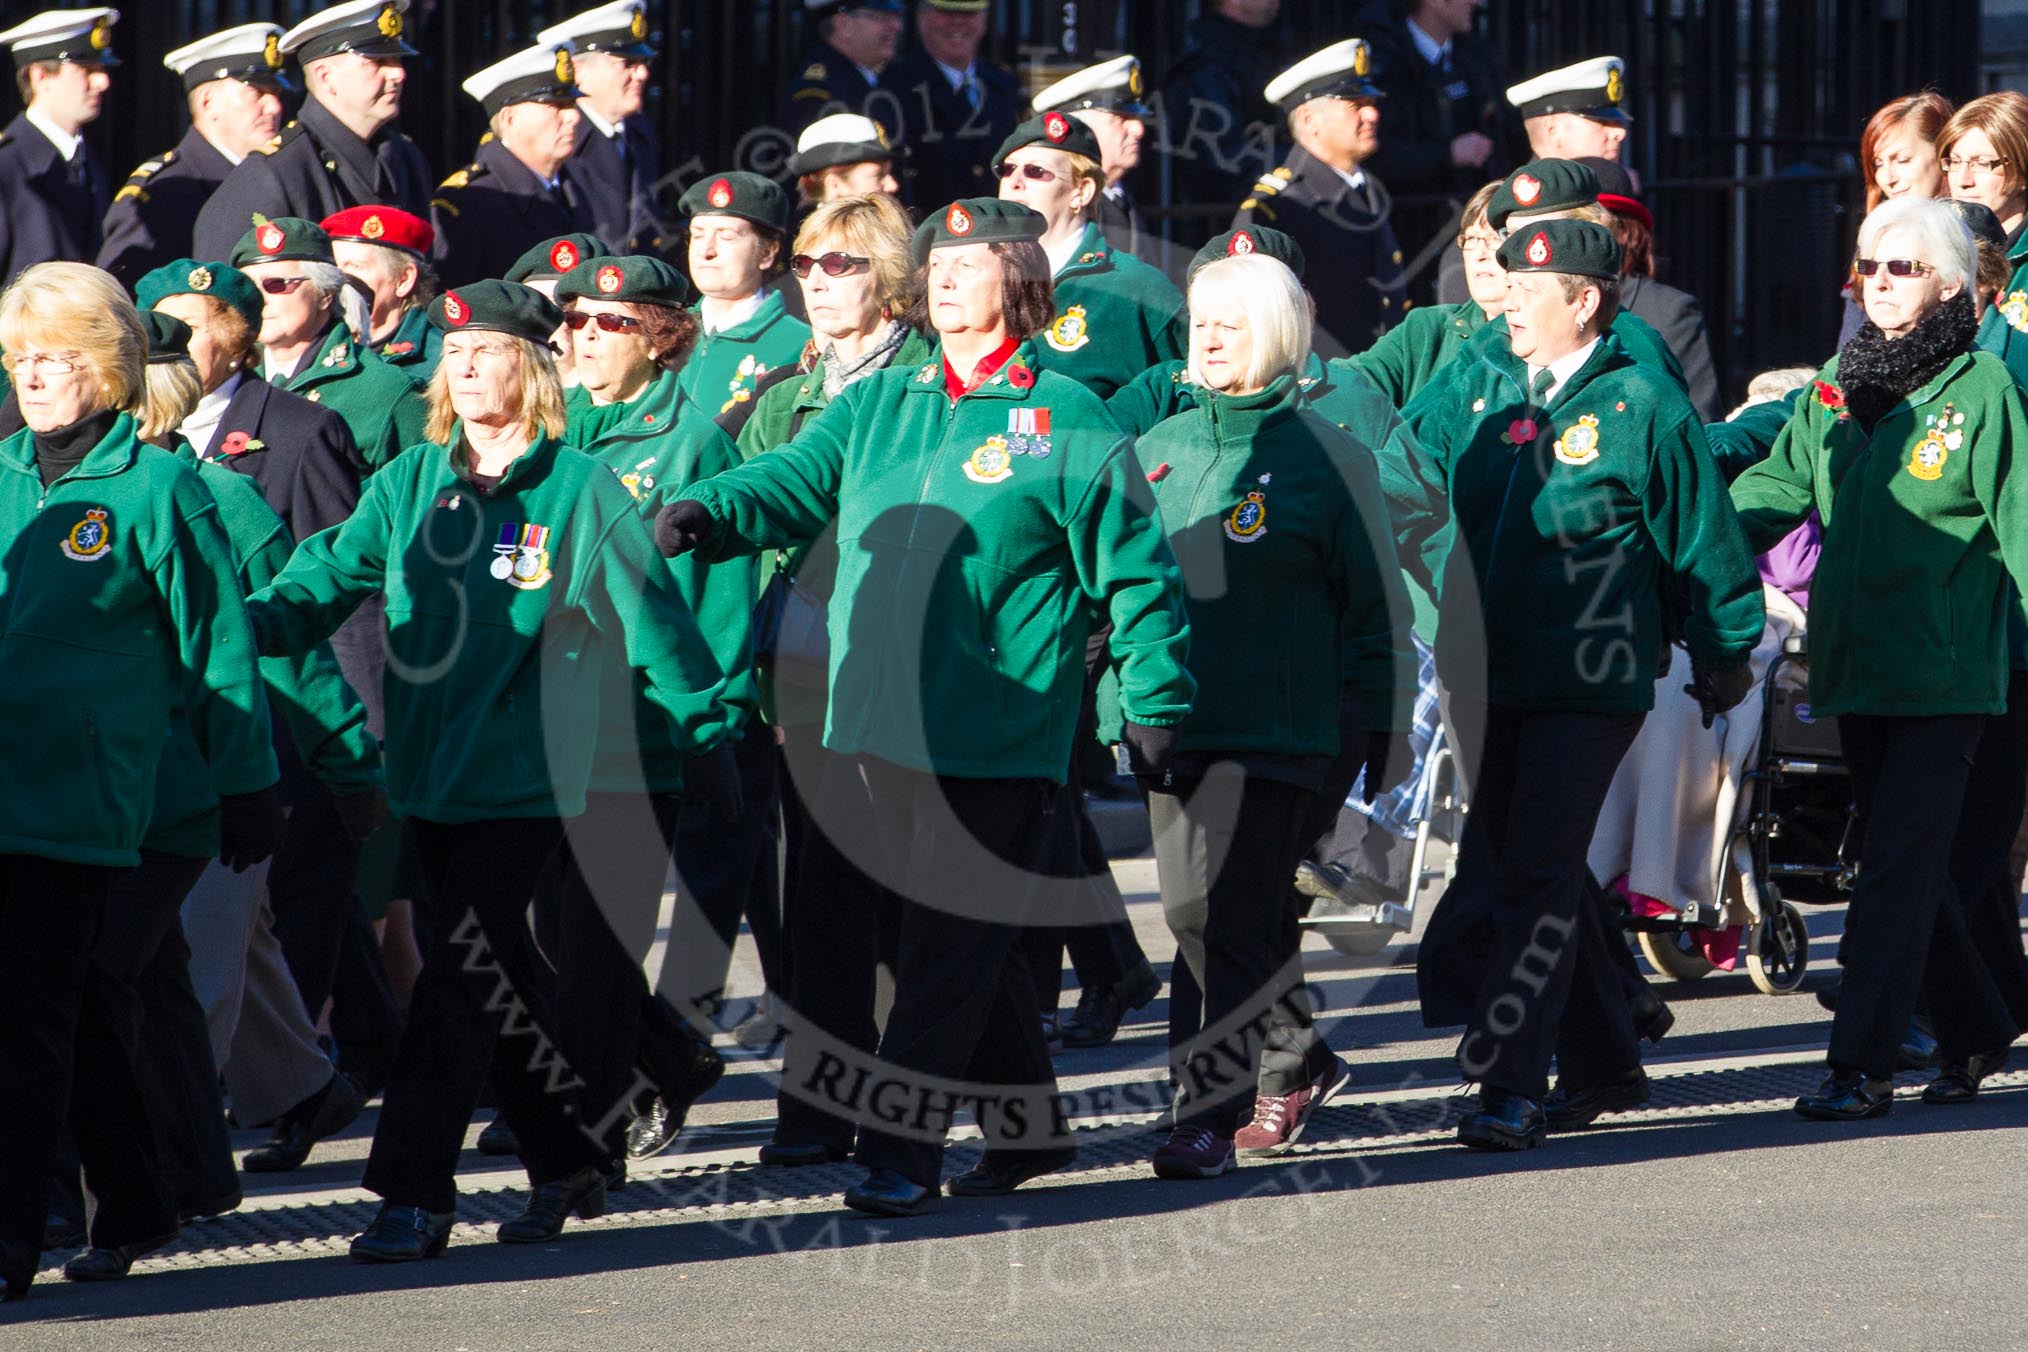 Remembrance Sunday 2012 Cenotaph March Past: Group B21 - Women's Royal Army Corps Association..
Whitehall, Cenotaph,
London SW1,

United Kingdom,
on 11 November 2012 at 11:57, image #951